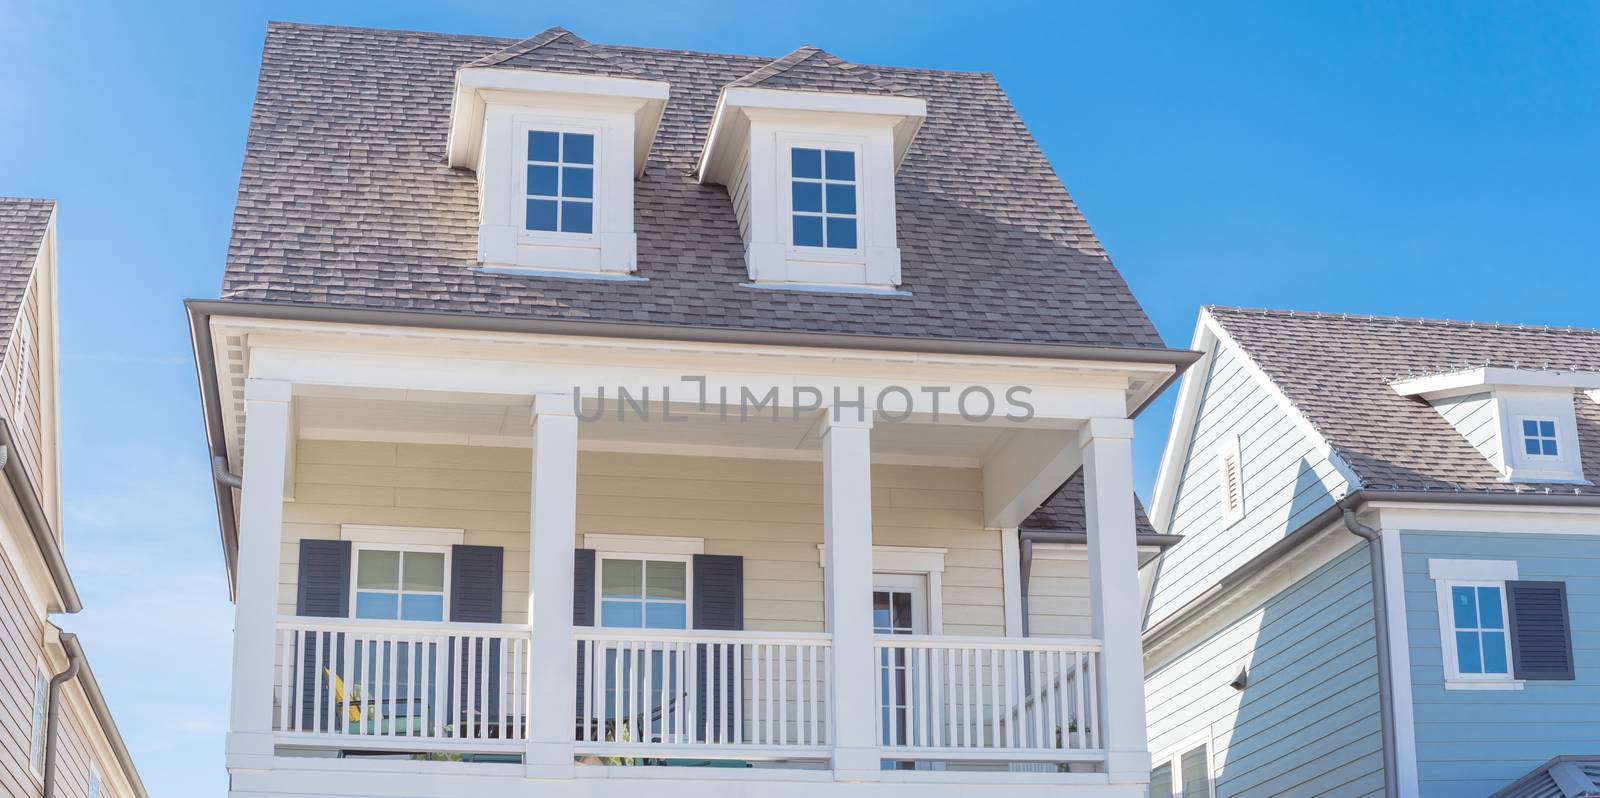 Panorama view second story porch with white painted outer edge and banister. Dormer roof windows with weathered shingle siding tiles under cloud blue sky. Country –style houses in suburbs Dallas